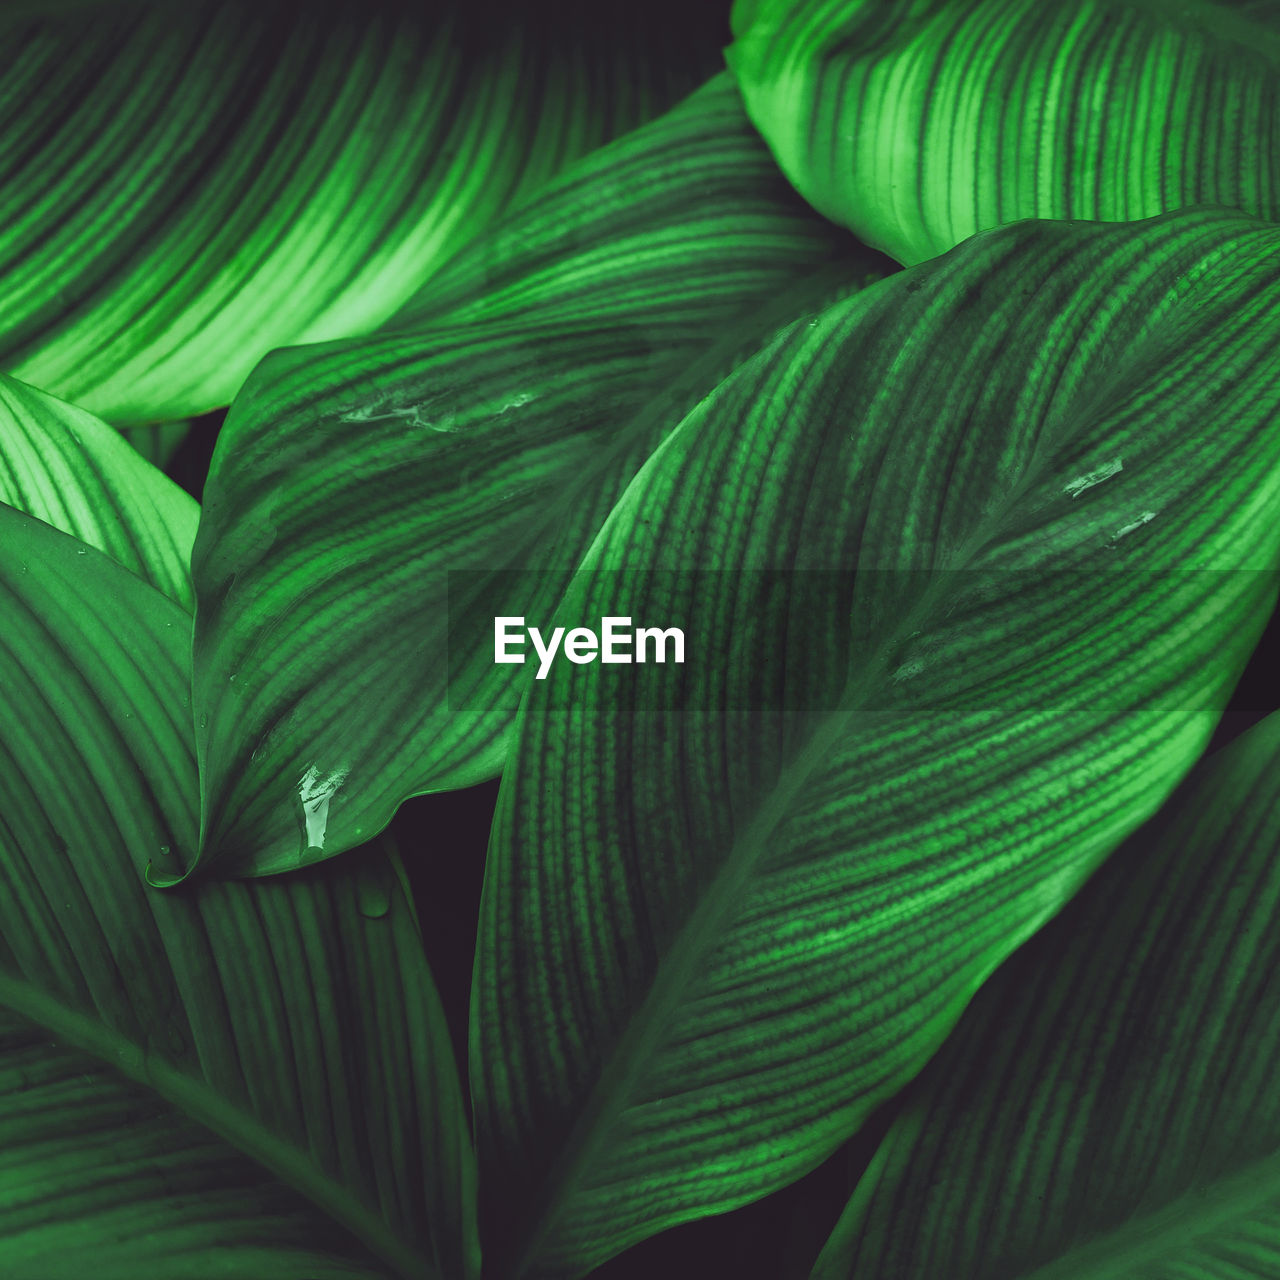 Full frame of green leaves pattern background, nature lush foliage leaf texture , tropical leaf